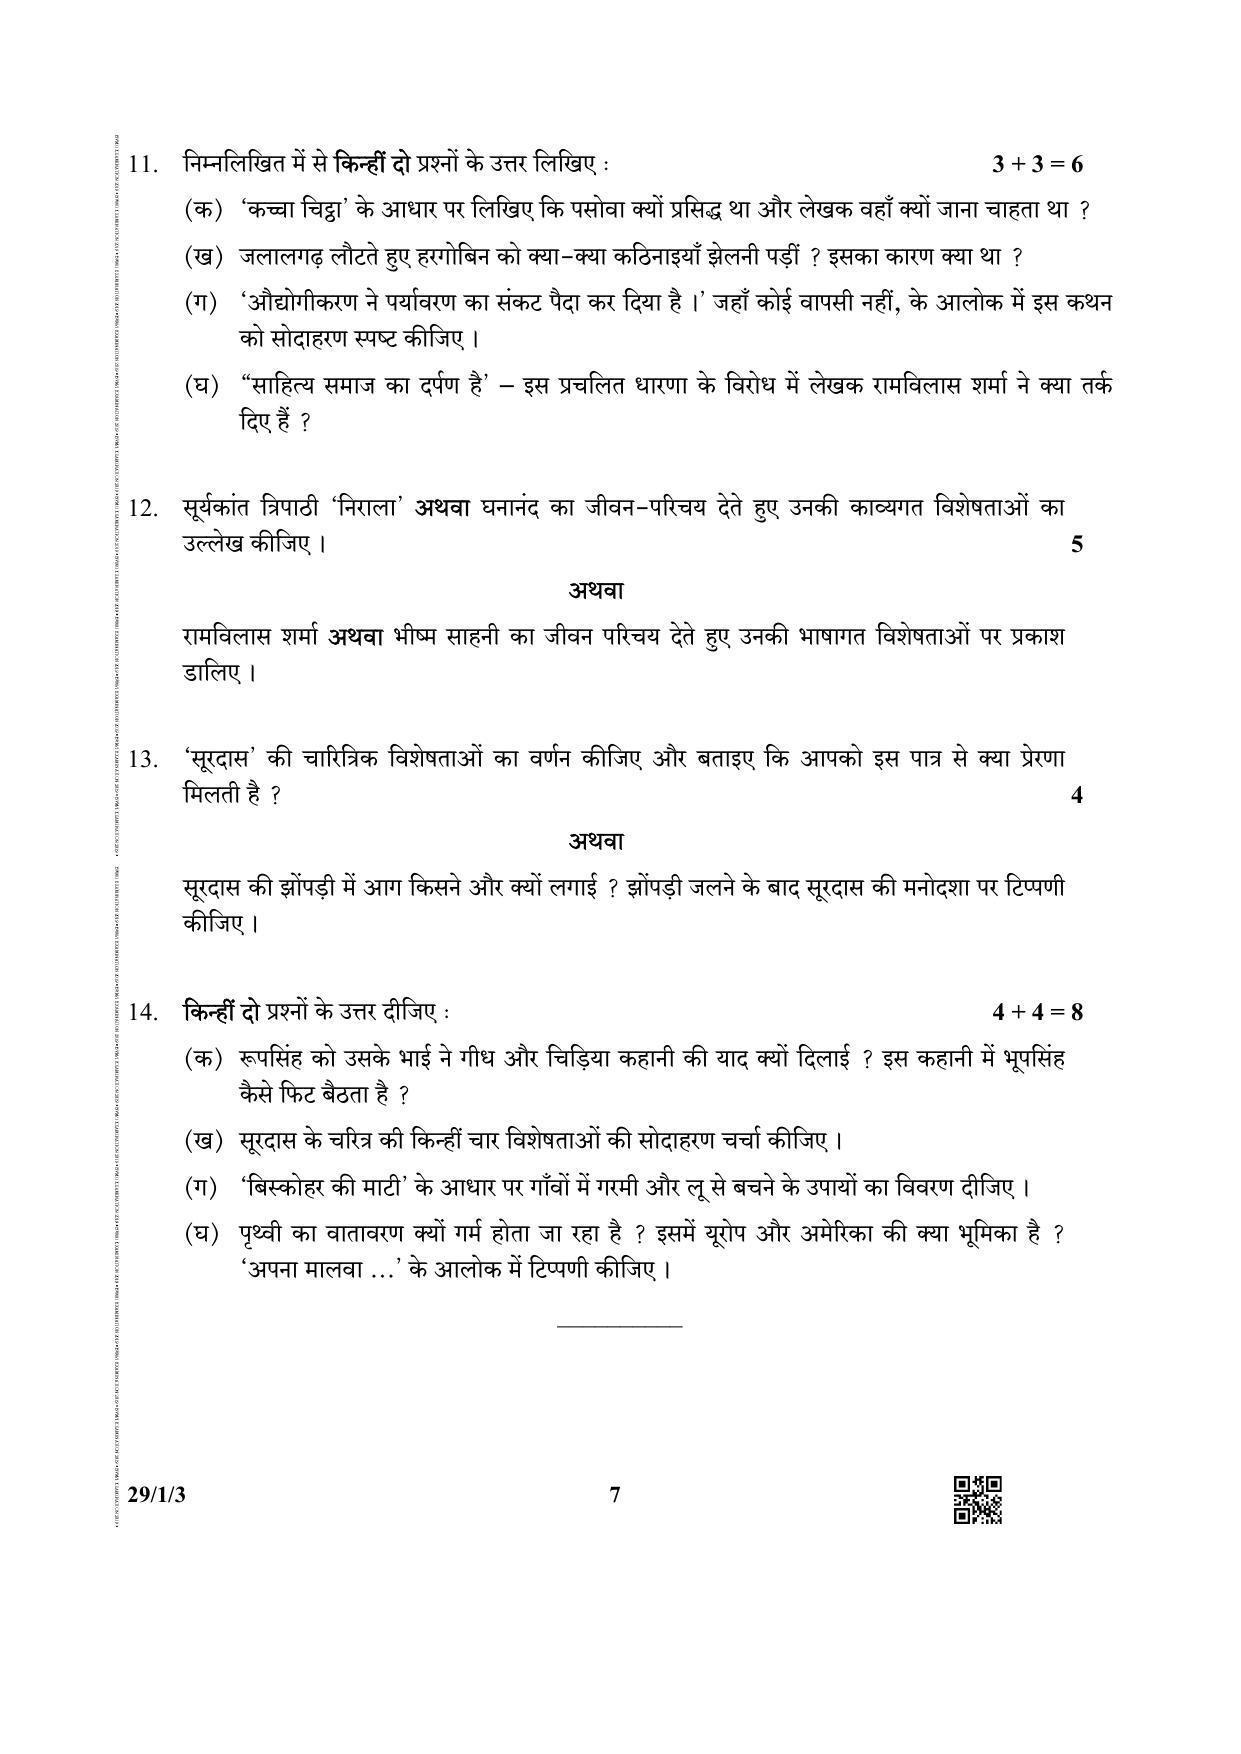 CBSE Class 12 29-1-3 (Hindi ELECTIVE) 2019 Question Paper - Page 7